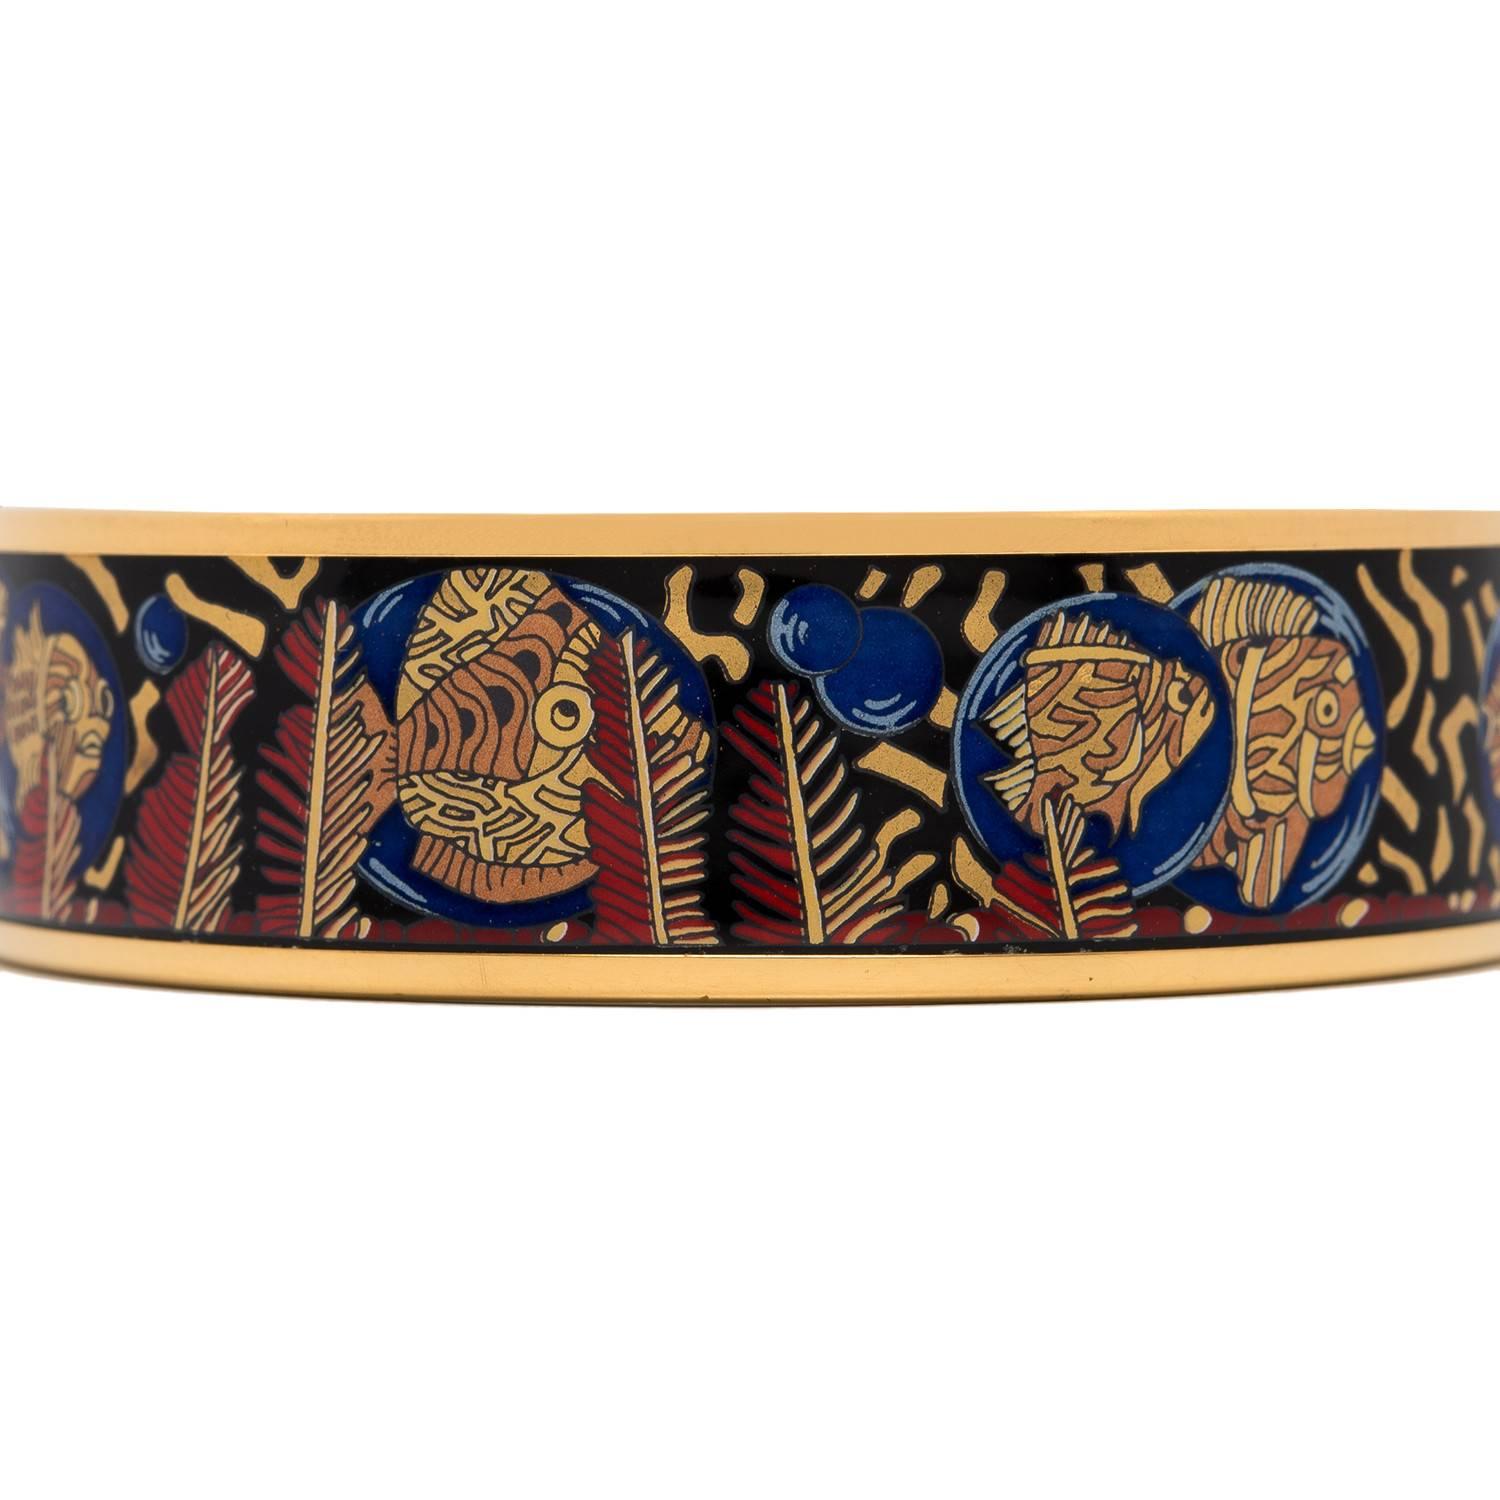 Hermes "Fishes and Ferns" wide printed enamel bracelet size PM (65).
 
This bracelet depicts fish and ferns on a black colored background with gold plated hardware.

Origin: Austria
 
Condition: Vintage; excellent  
 
Accompanied by: